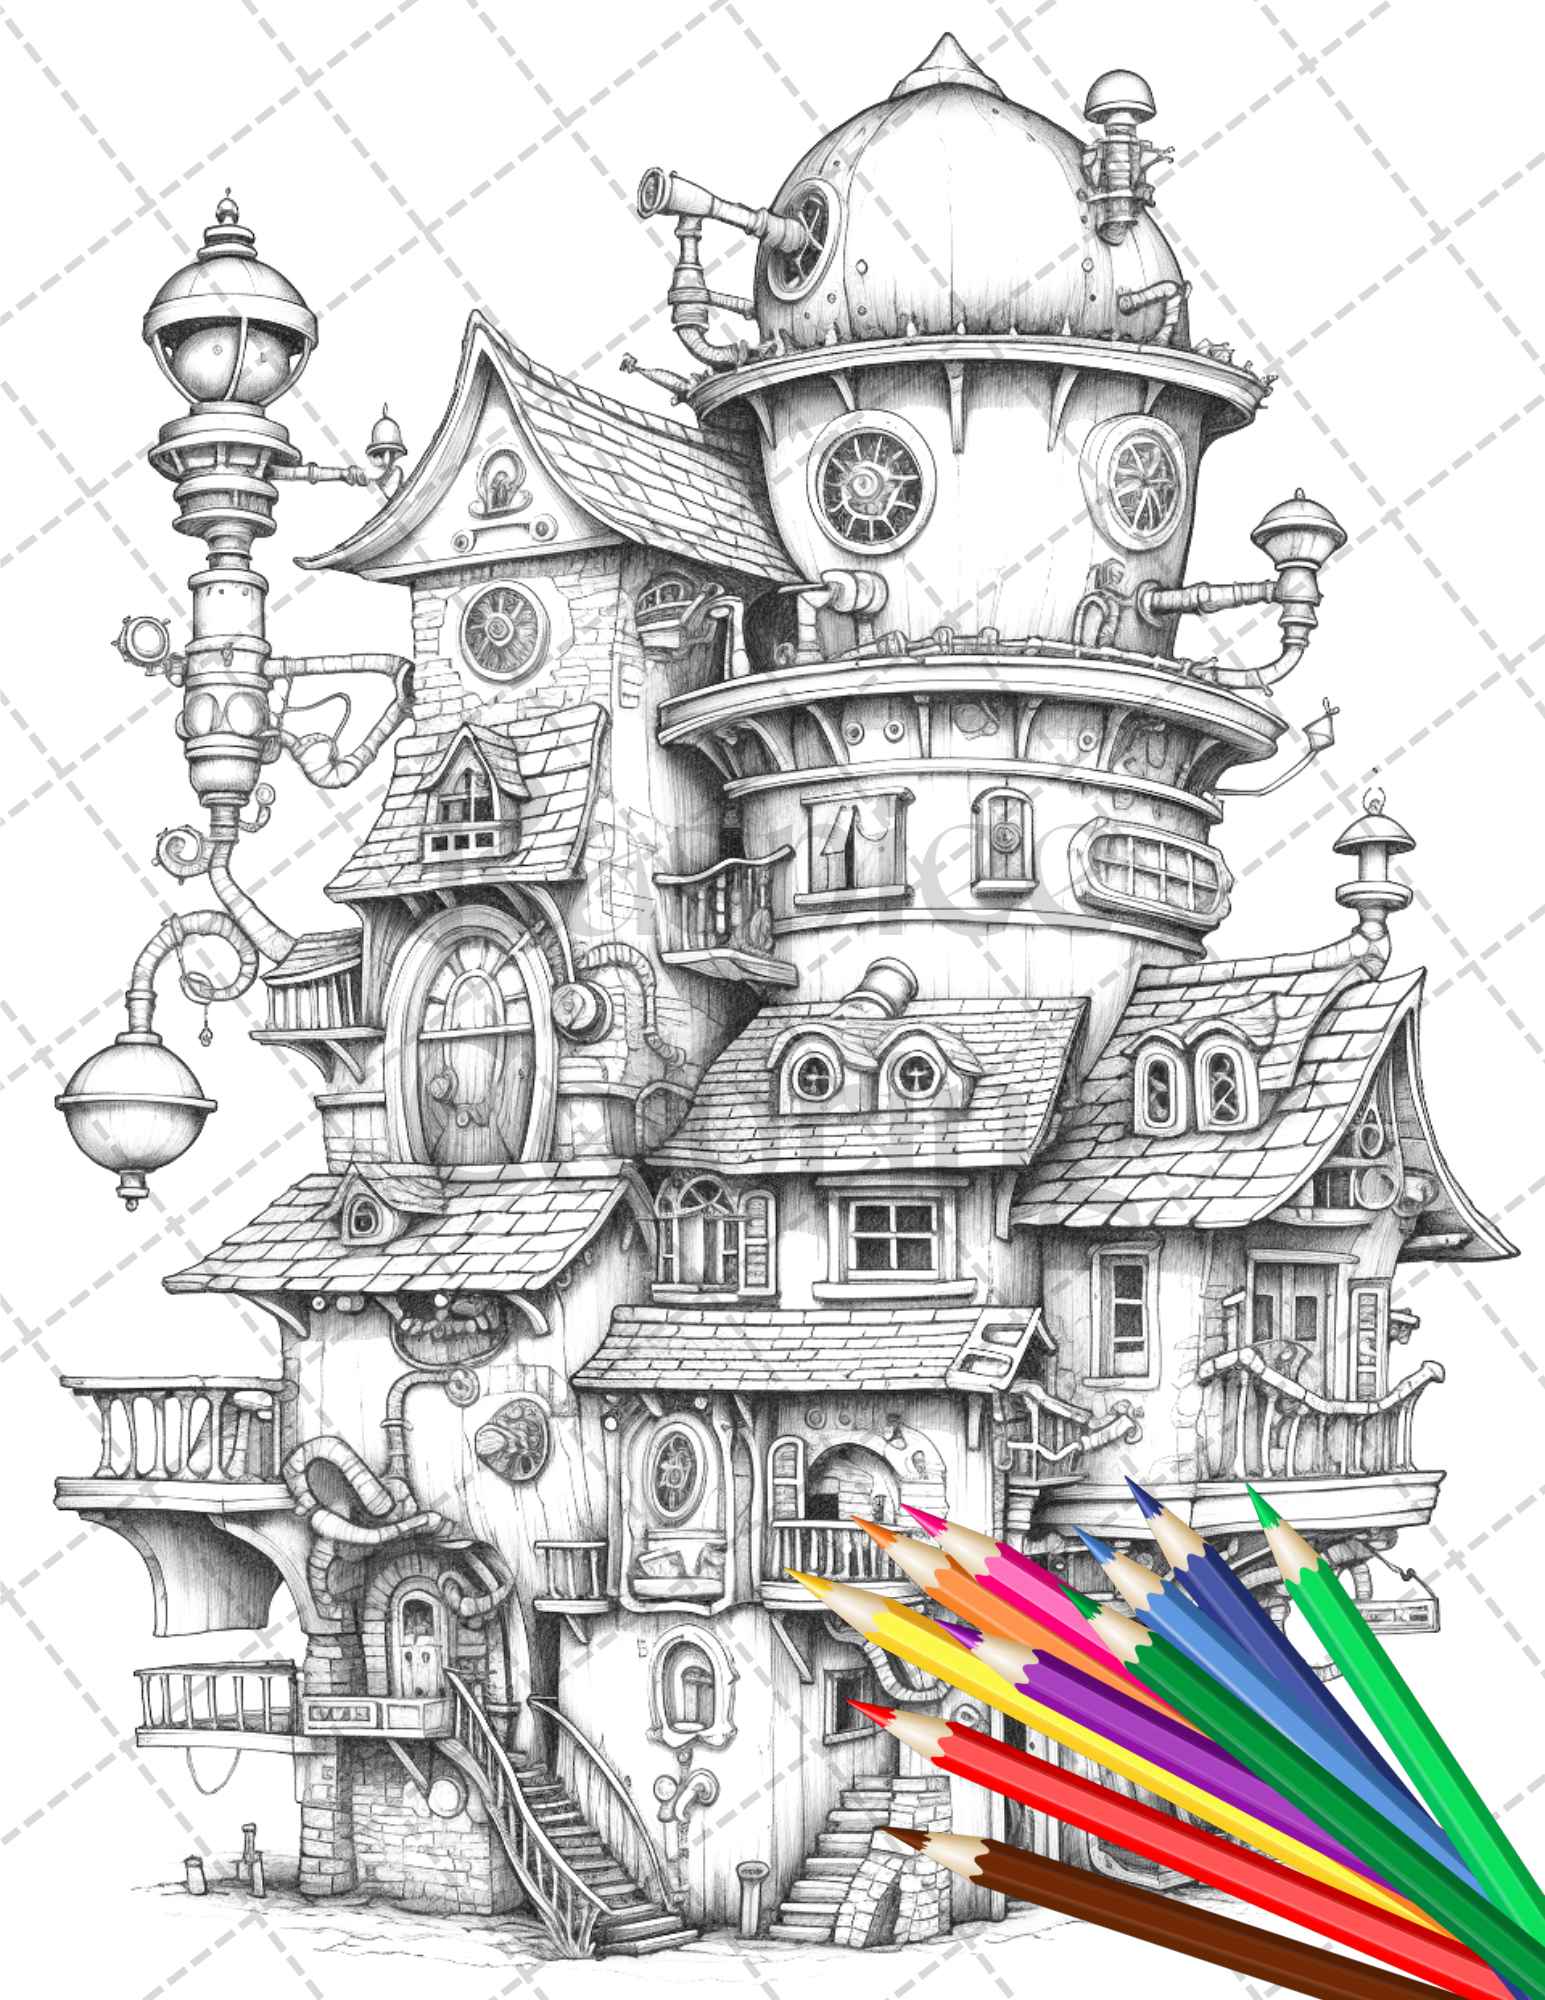 steampunk houses grayscale coloring pages, printable adult coloring book, detailed Victorian architecture coloring, grayscale coloring for adults, intricate line art, vintage industrial art